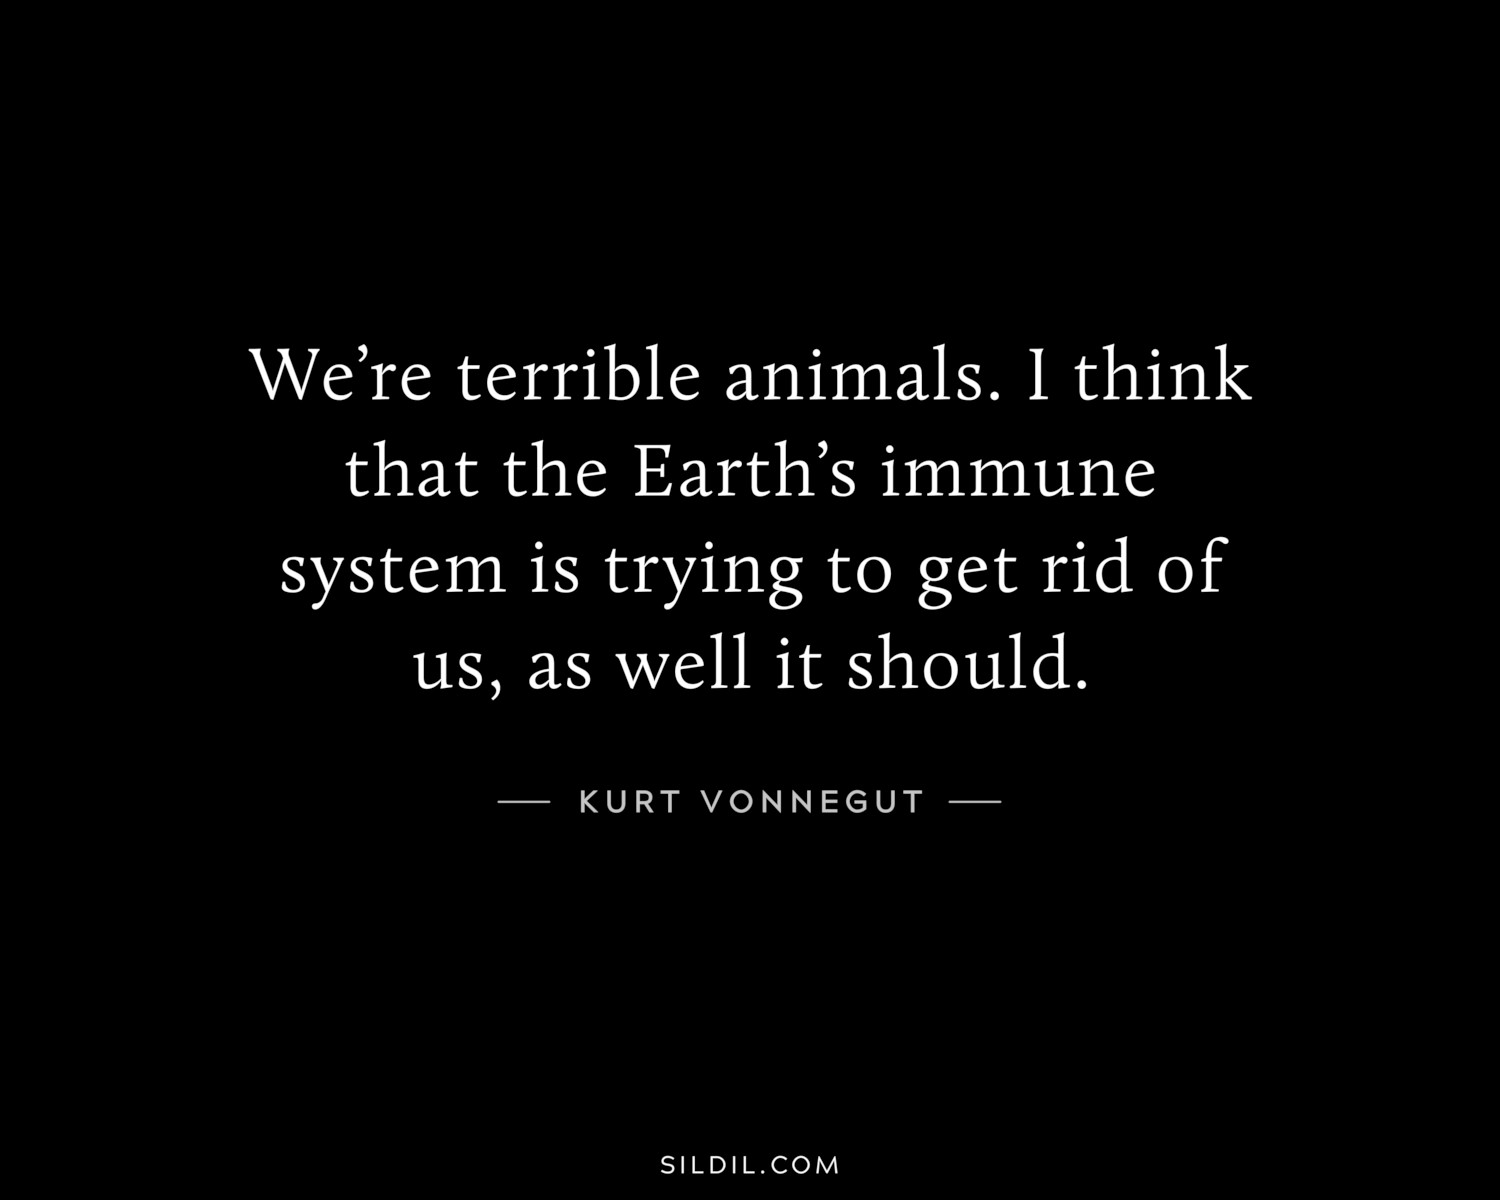 We’re terrible animals. I think that the Earth’s immune system is trying to get rid of us, as well it should.